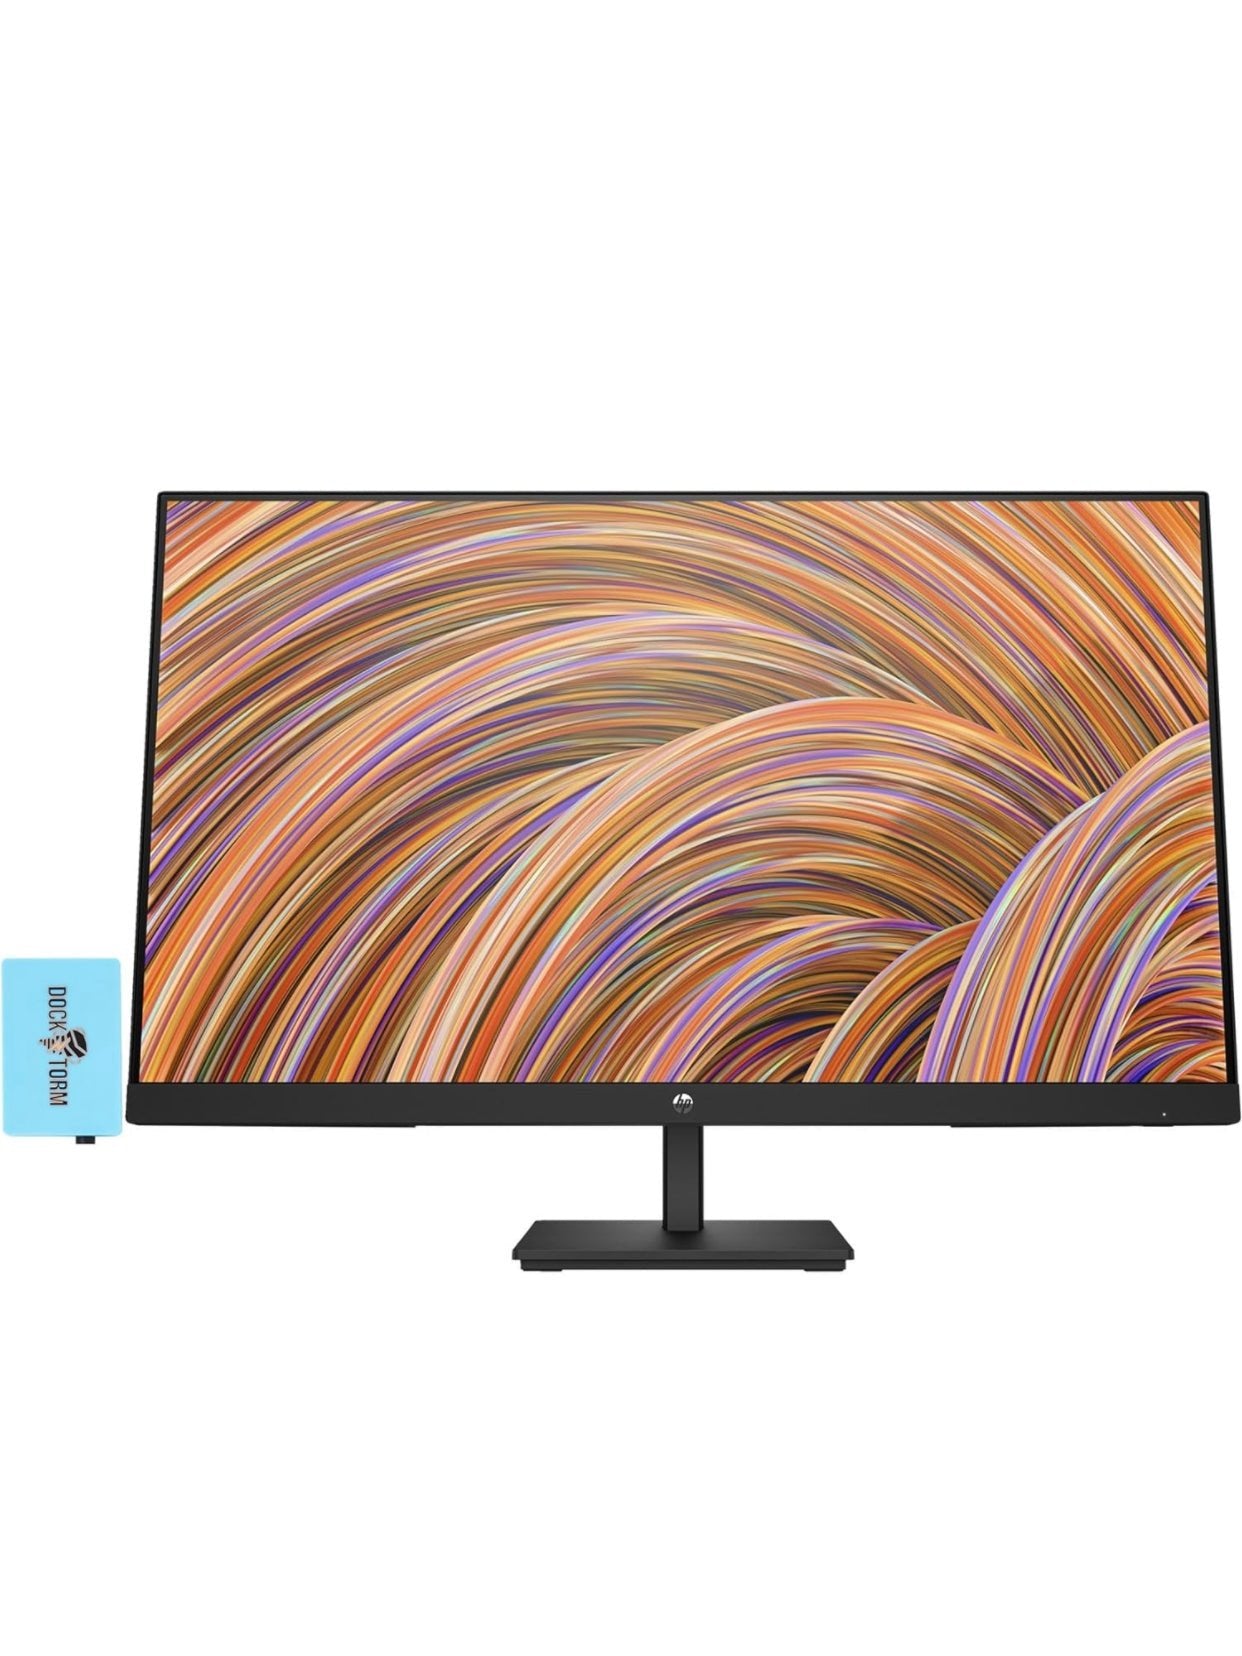 HP 27" FHD IPS 1920x1080 Monitor Bundle with Docztorm Dock, 75 Hz Refresh Rate, 1 HDMI 1.4, 1 Display Port 1.2, 1 VGA, Anti-Glare, Ideal for Office Work, Black 2024 Latest Model